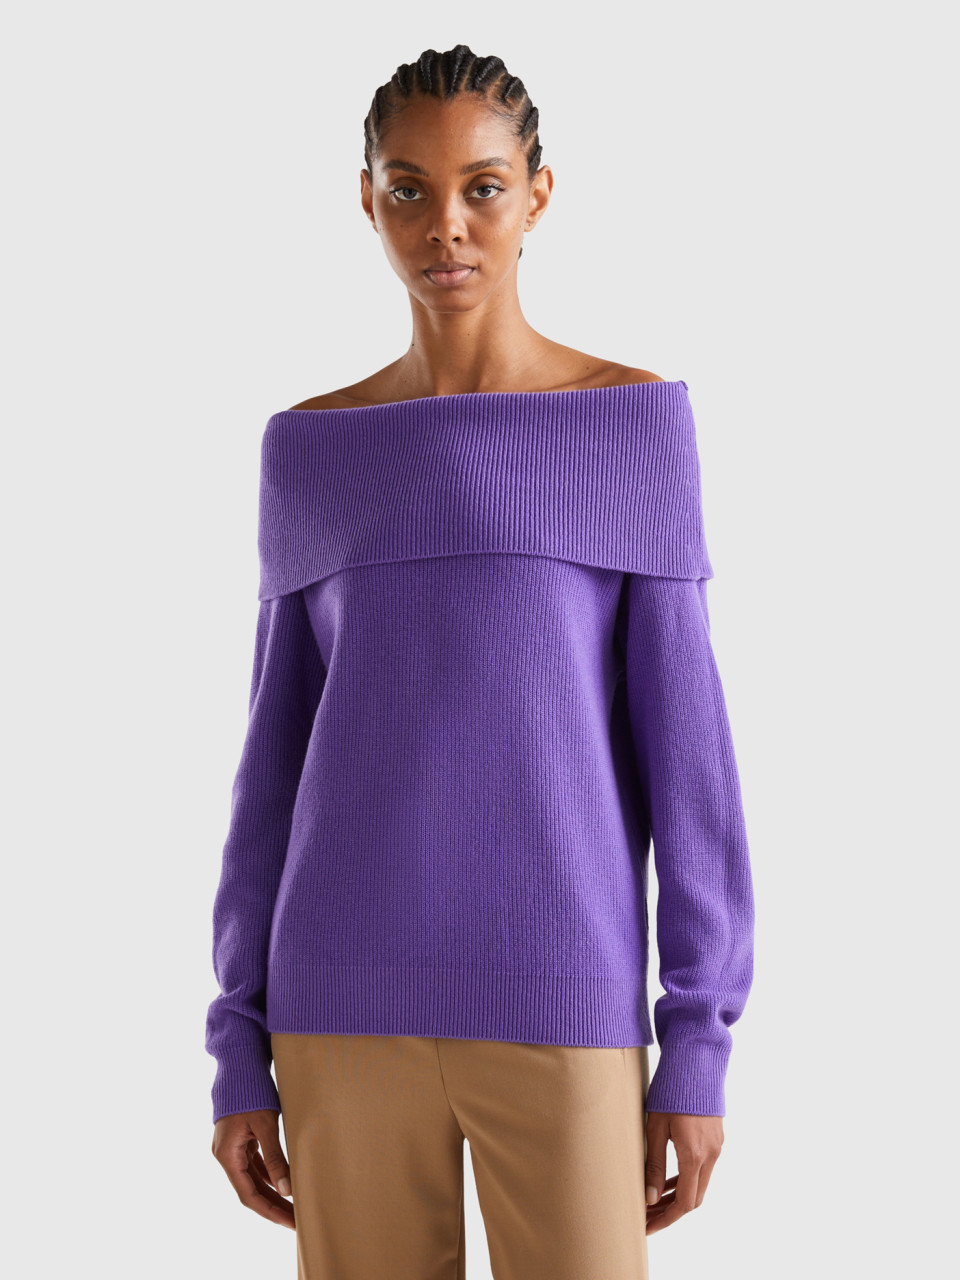 Benetton, Sweater With Bare Shoulders, Violet, Women